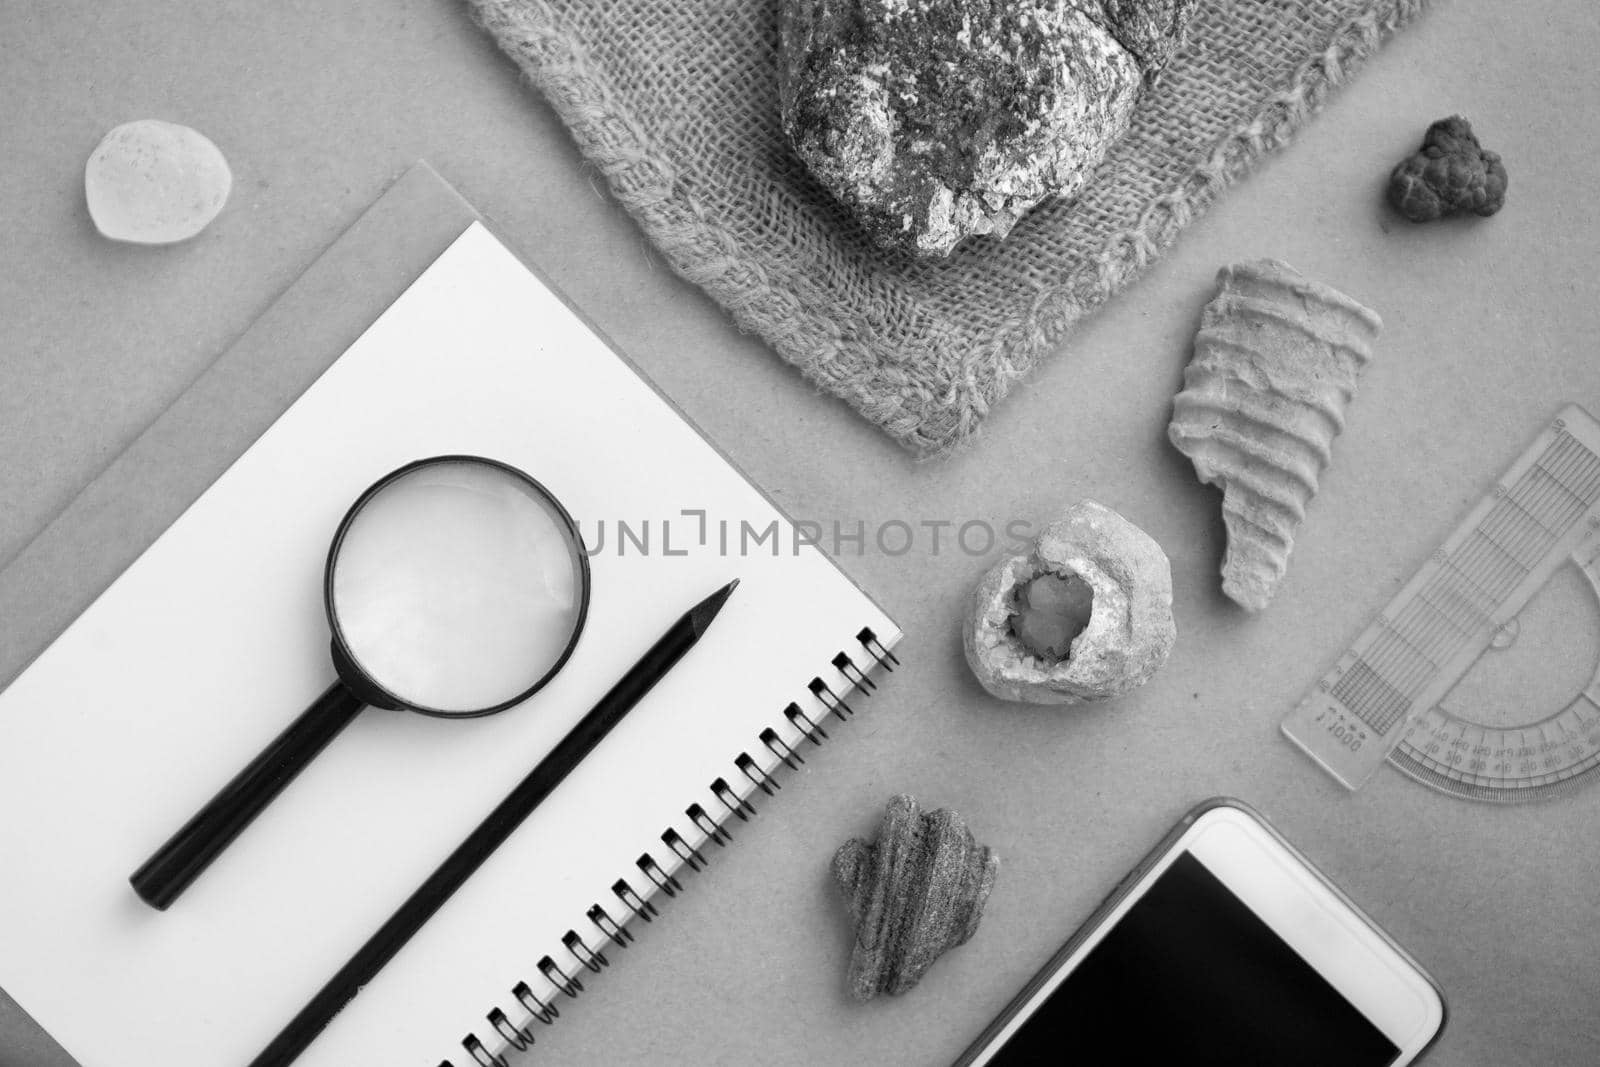 Stone samples, loop, notebook and mobile phome at geological laboratory. Geology rock laboratory. Laboratory for analysis of geological soil materials, stones, minerals, rocks samples for researchers